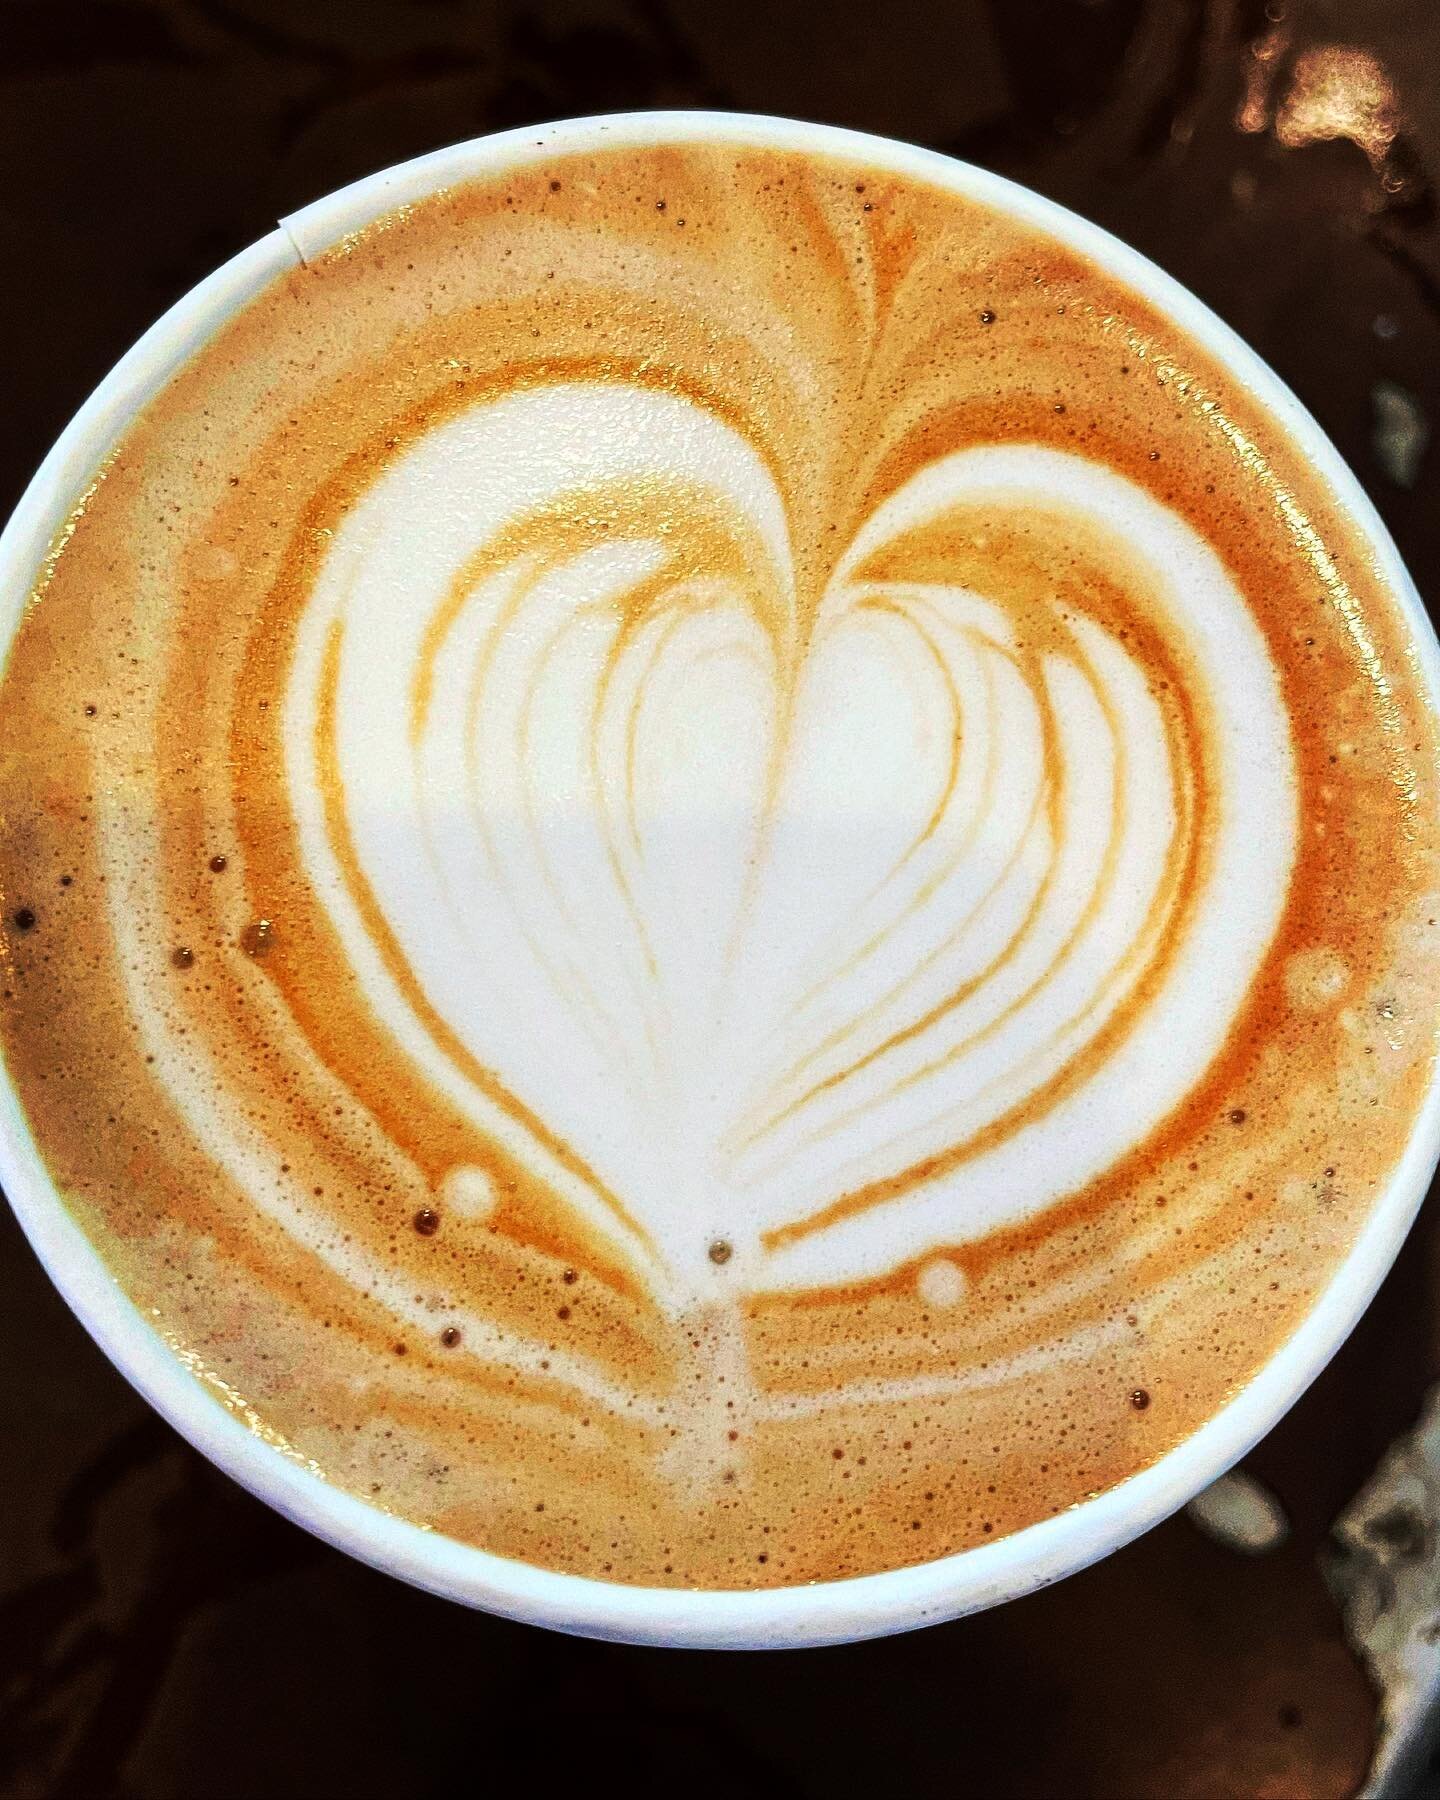 Love is in the air and it smells like coffee ☕️ 

Happy Valentine&rsquo;s Day ❤️from us at Crave to you.

#coffee #latteart #valentinesday #cravecoffee